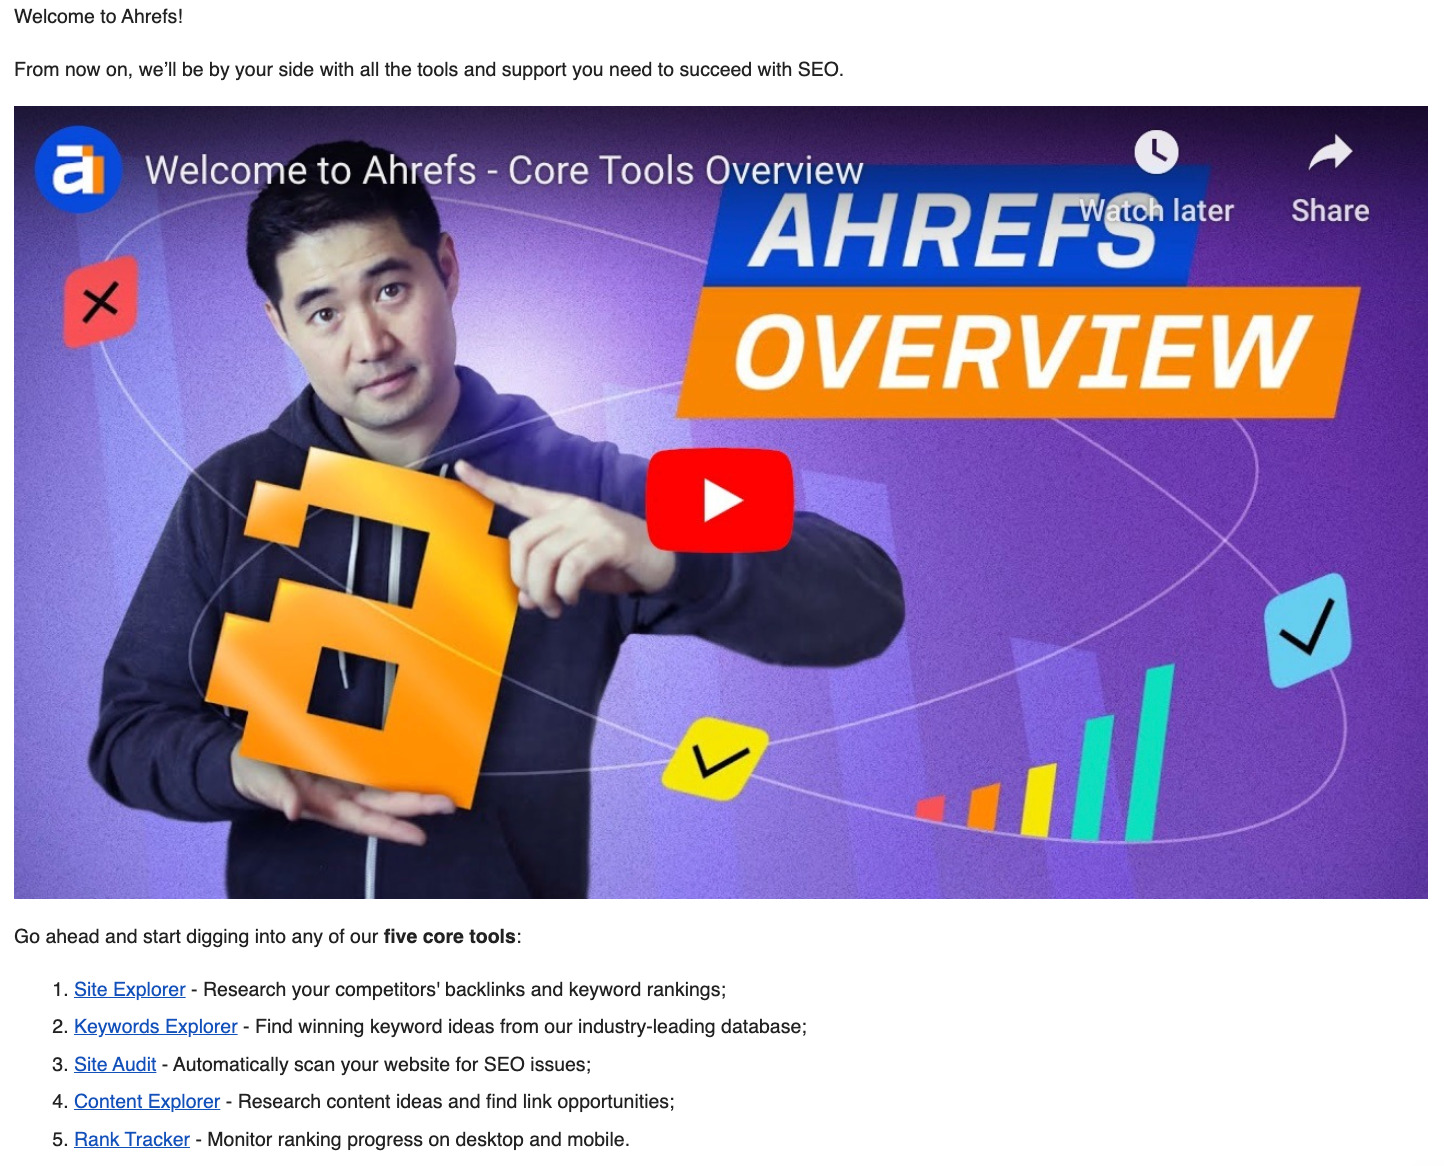 Excerpt from Ahrefs welcome email.